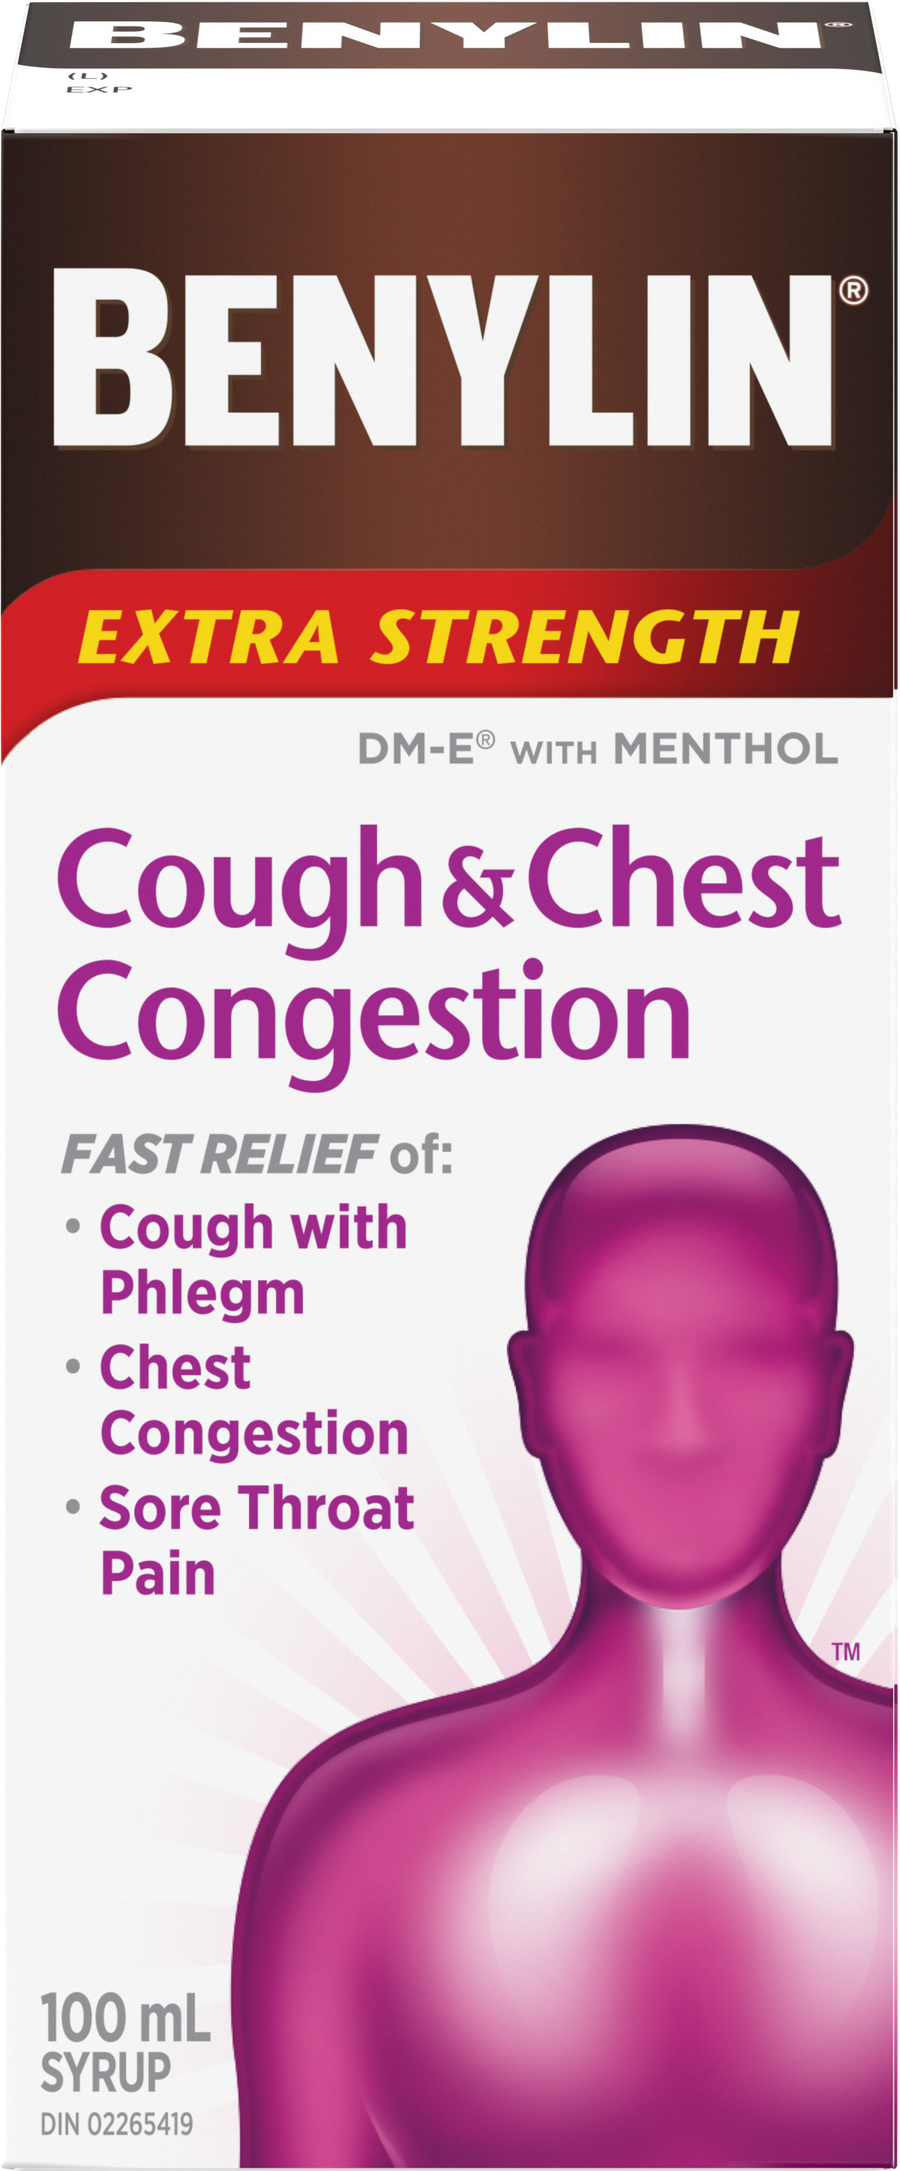 Benylin Extra Strength Cough & Chest Congestion Syrup 100mL - Quecan